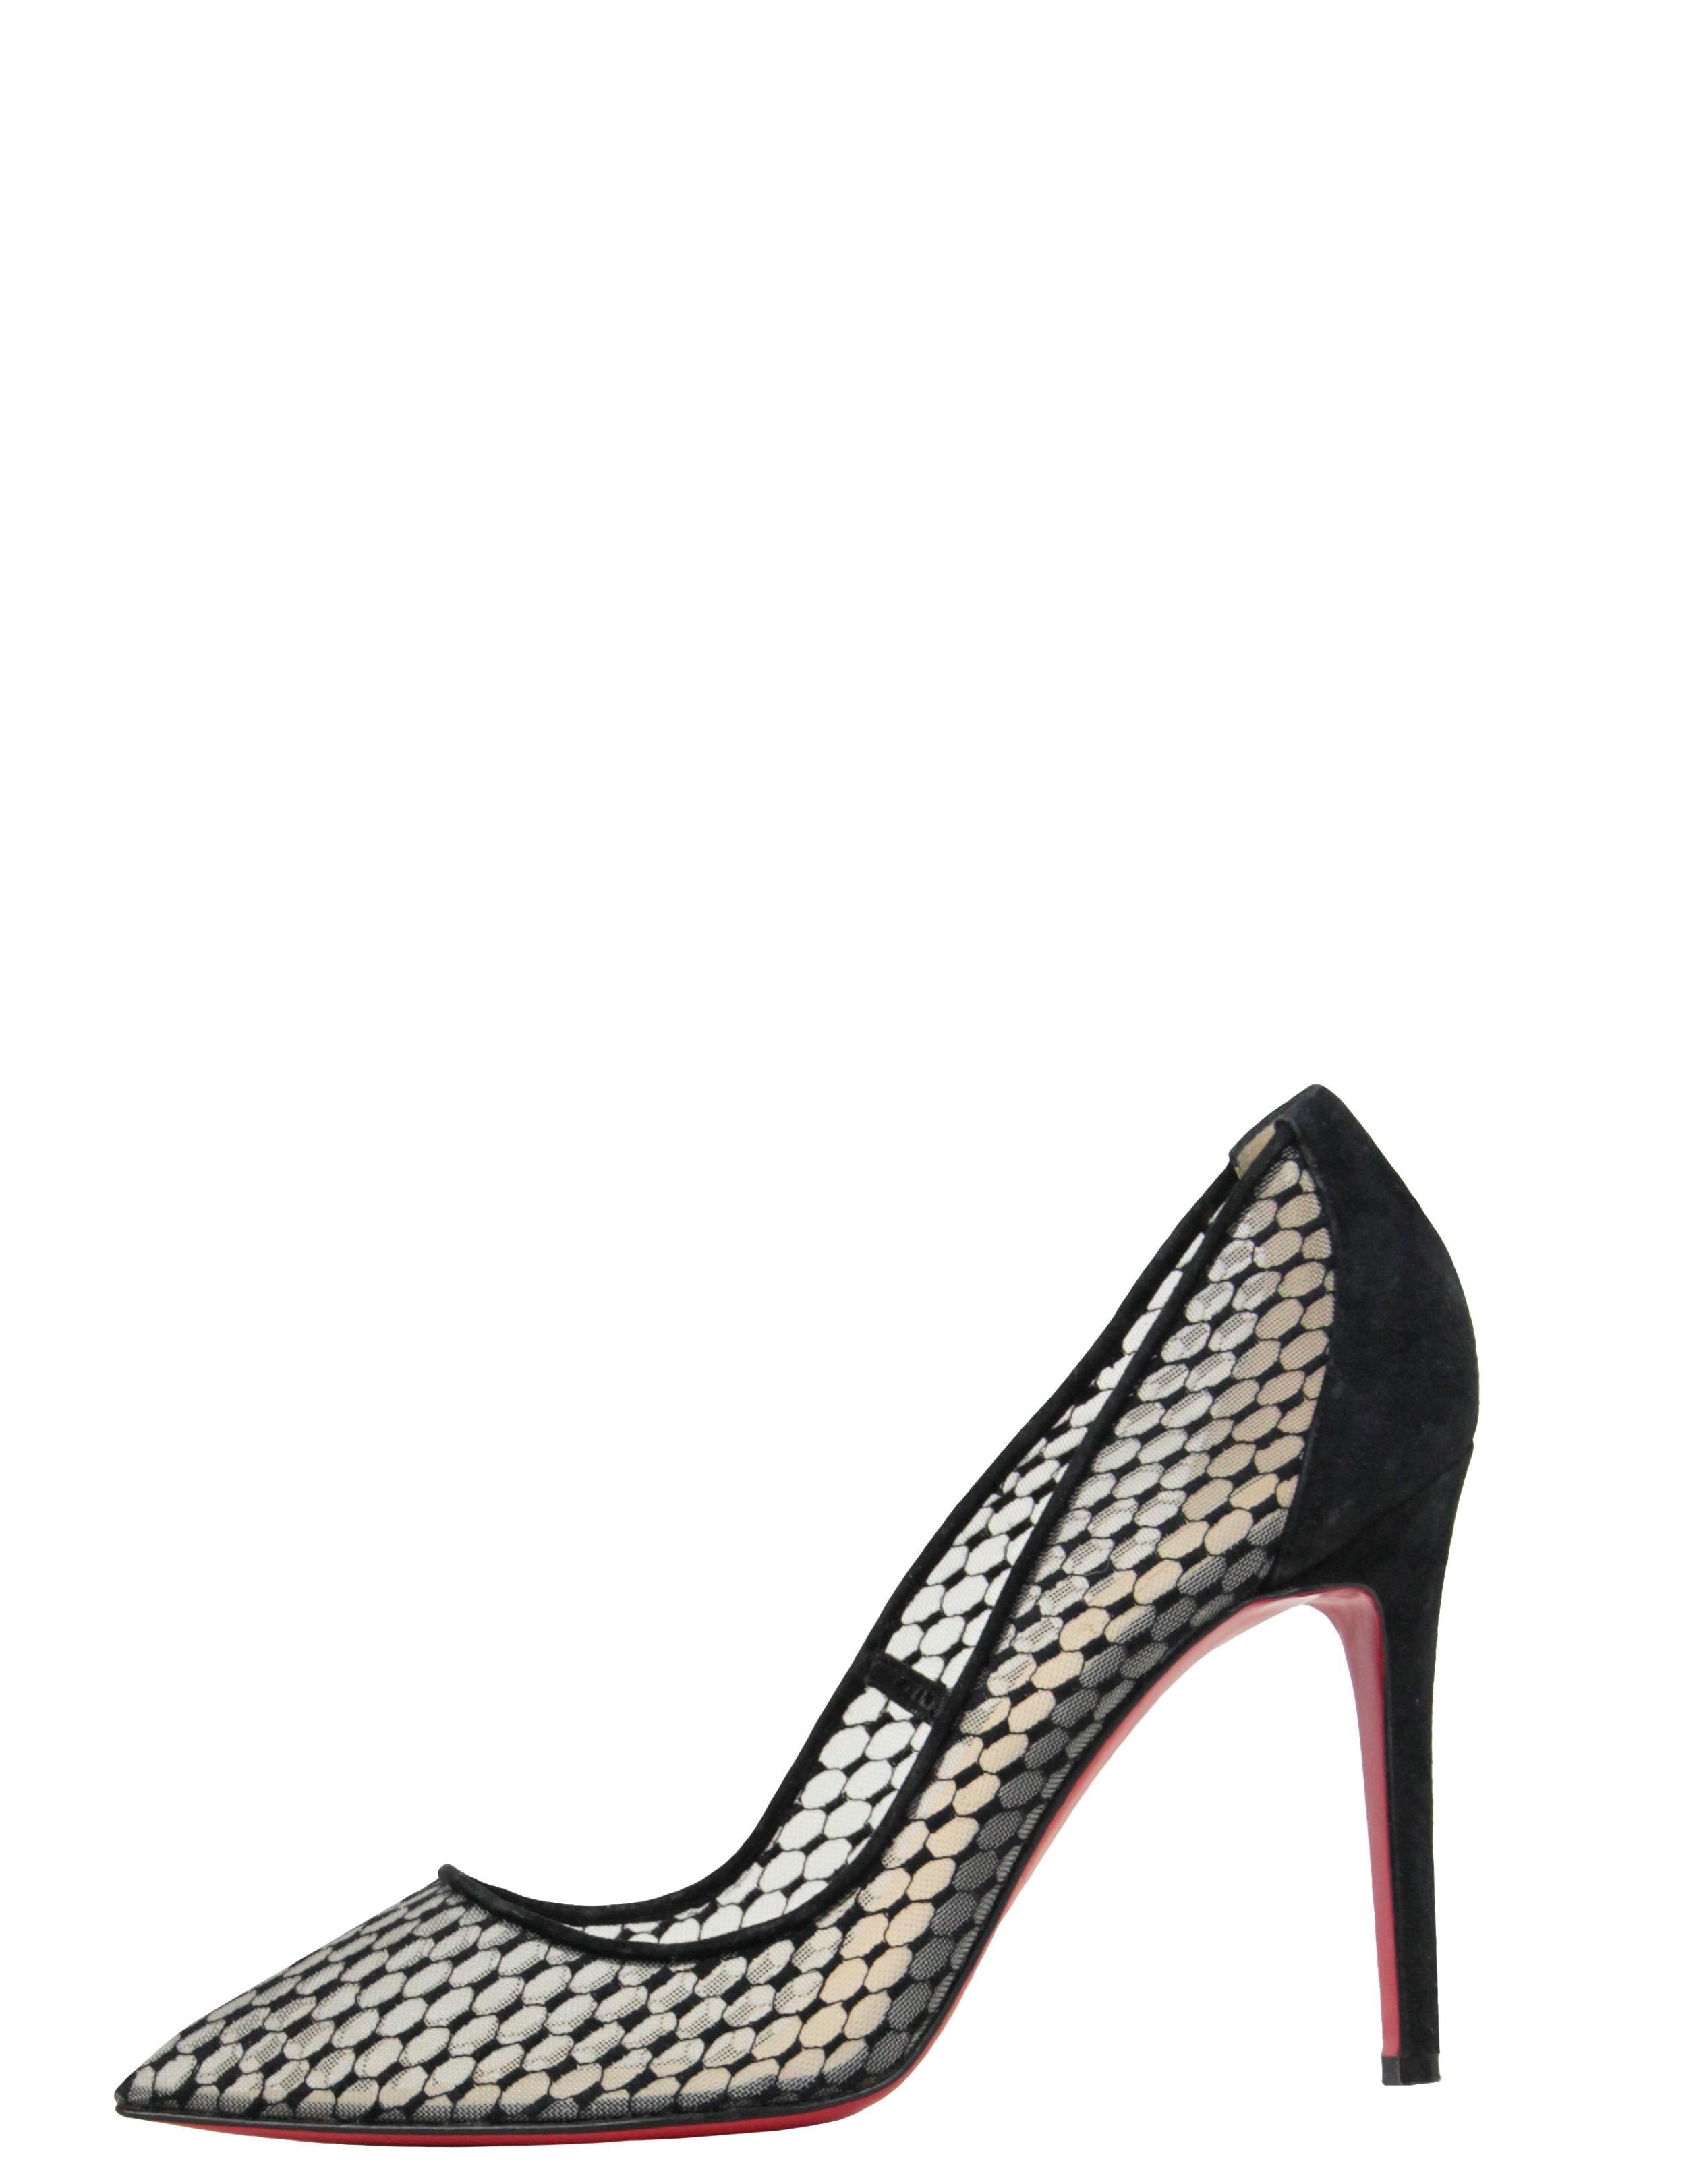 Christian Louboutin Follies Resille 100 Suede-Trimmed Mesh Pumps sz 39.5. Features net embroidered mesh. 

Made In: Italy
Color: Black
Materials: Suede and mesh
Overall Condition: Excellent with very little wear
Estimated Retail: $790 plus